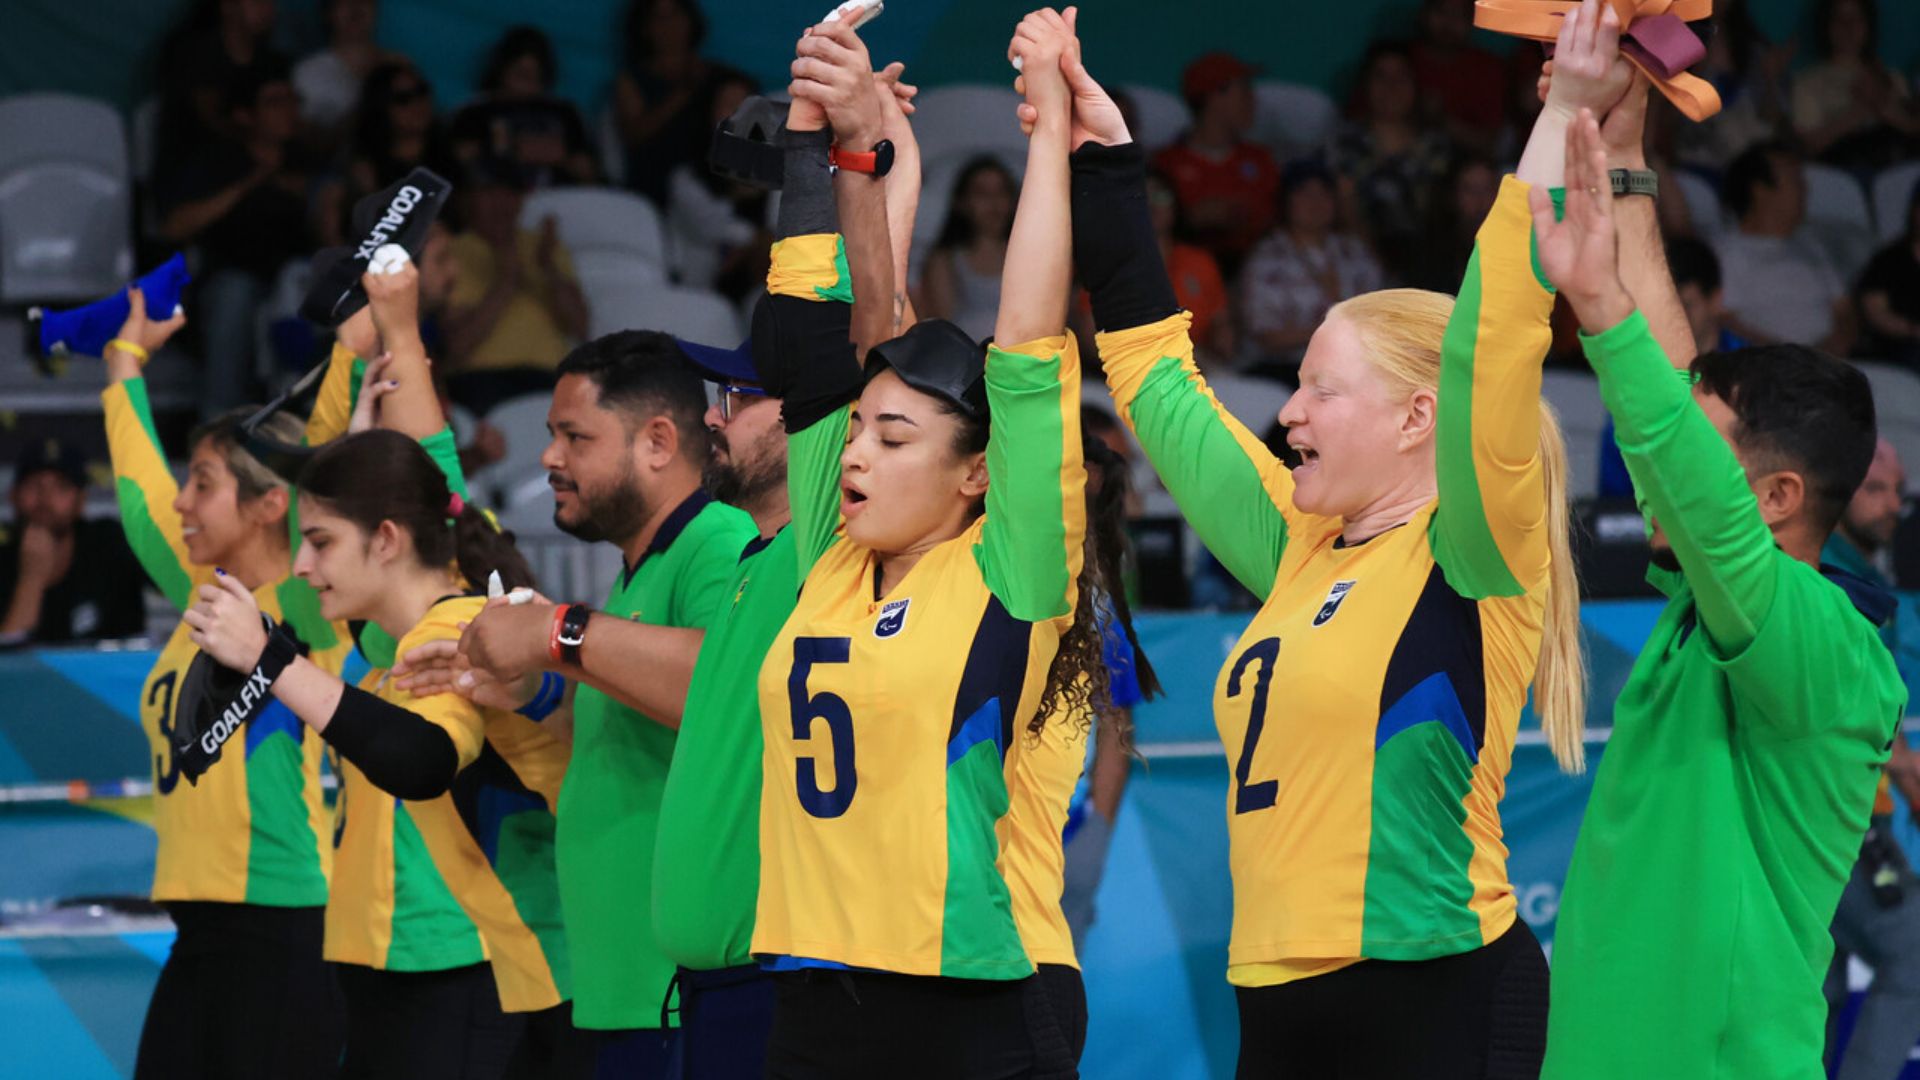 Brazil Advances to Quarterfinals in Goalball With a “Poker" From Danielle Vilas